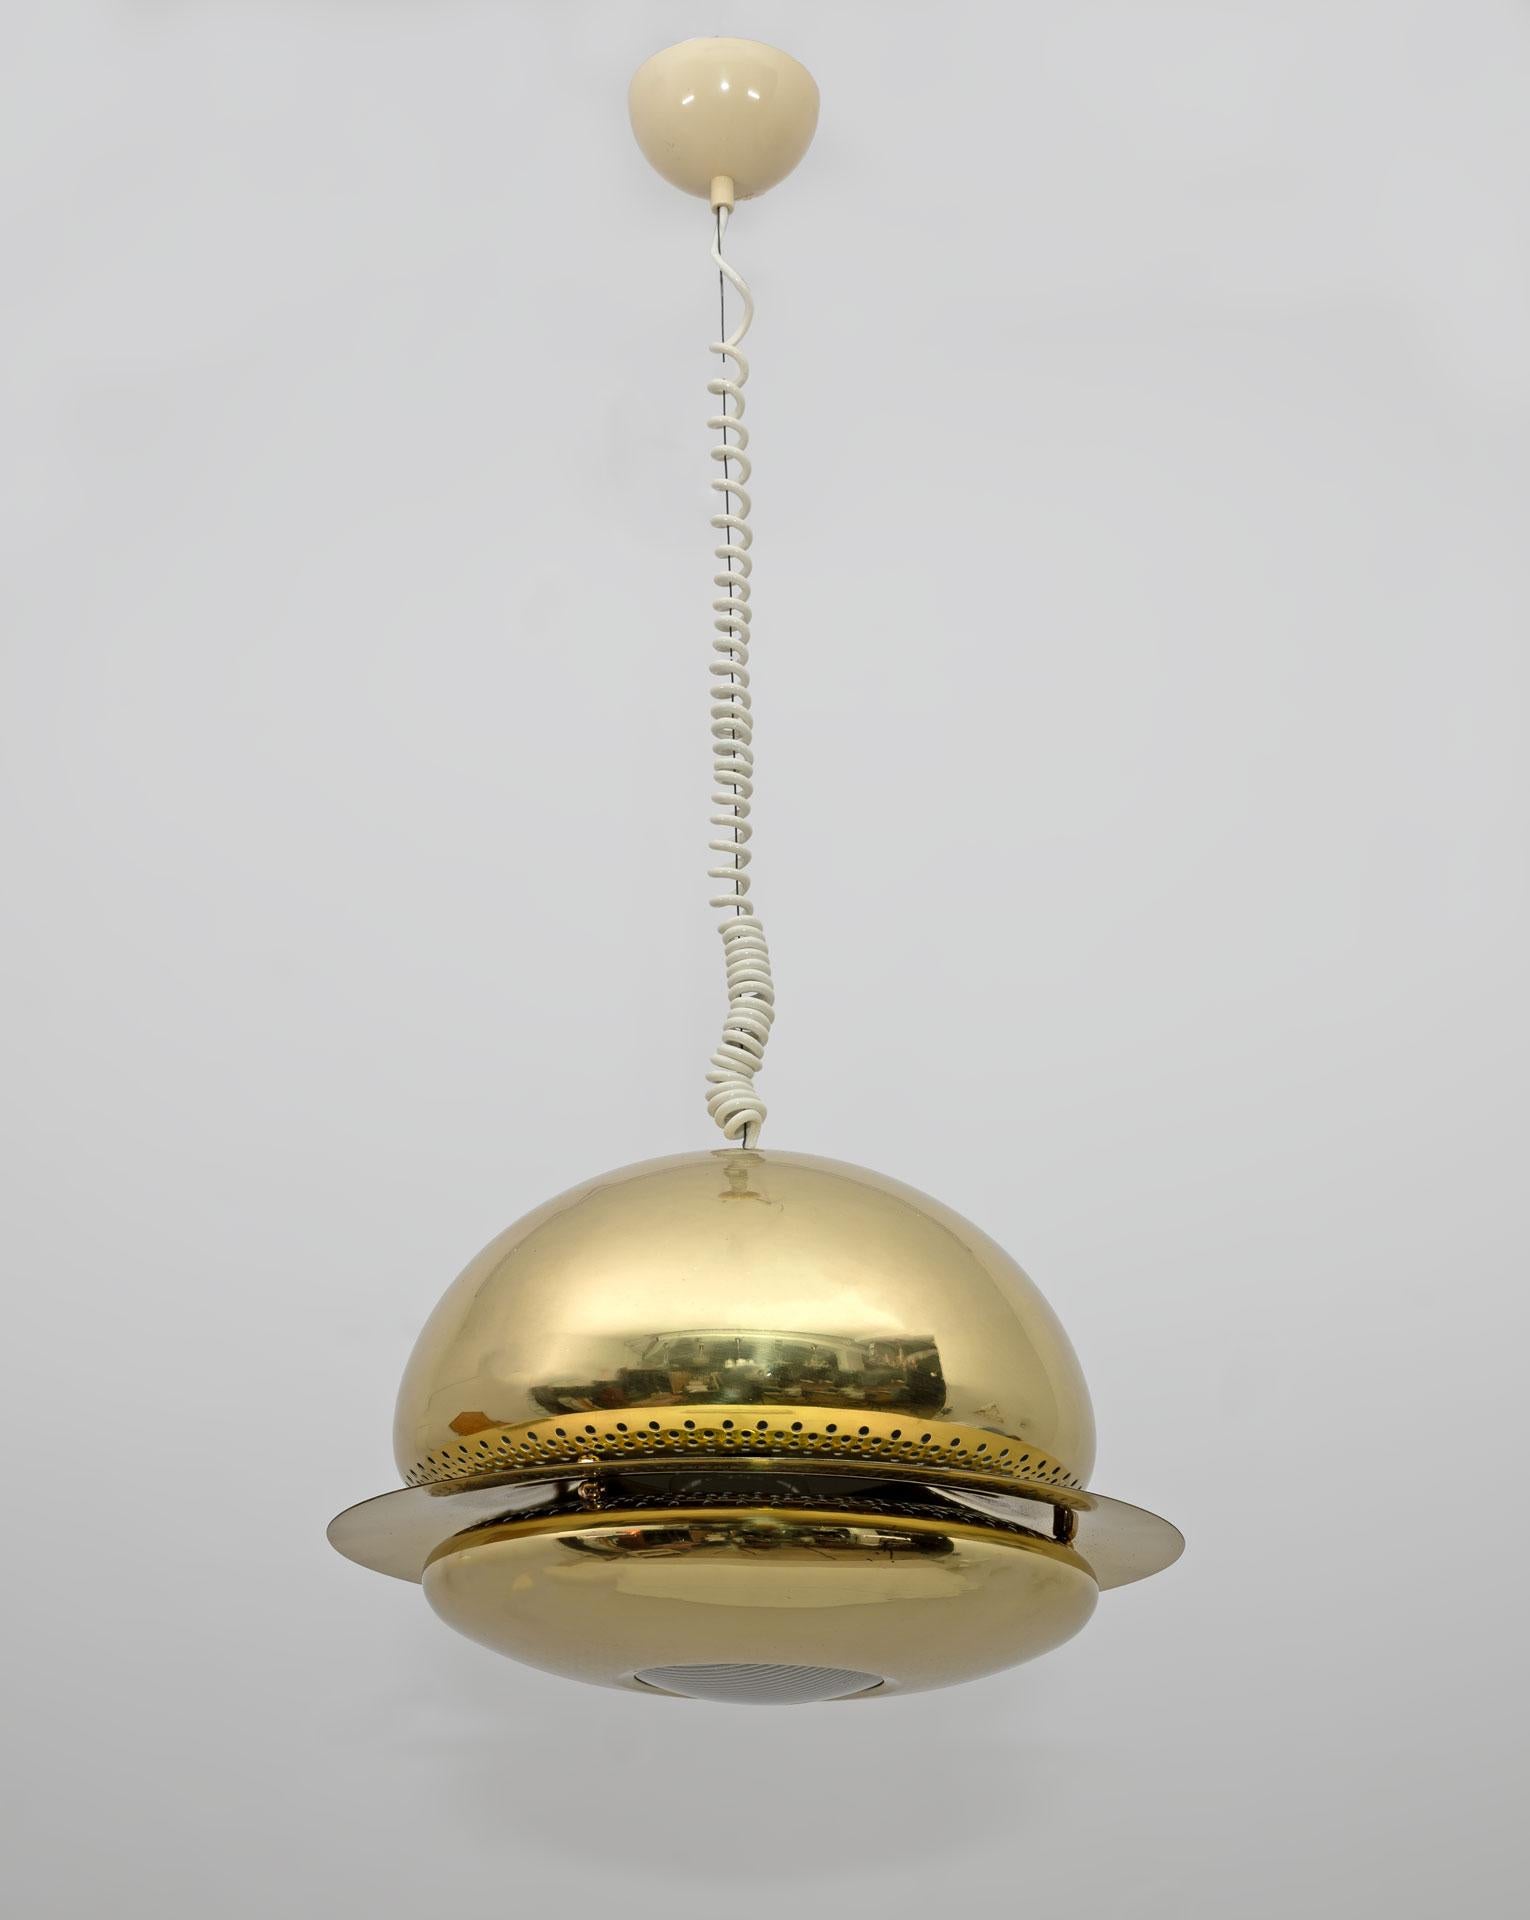 Afra & Tobia Scarpa, suspension lamp mod. Nictea
Structure and diffuser in polished brass with glass reflector.
Flos production 1961
The lamp measures, without the cable, height 28 cm.